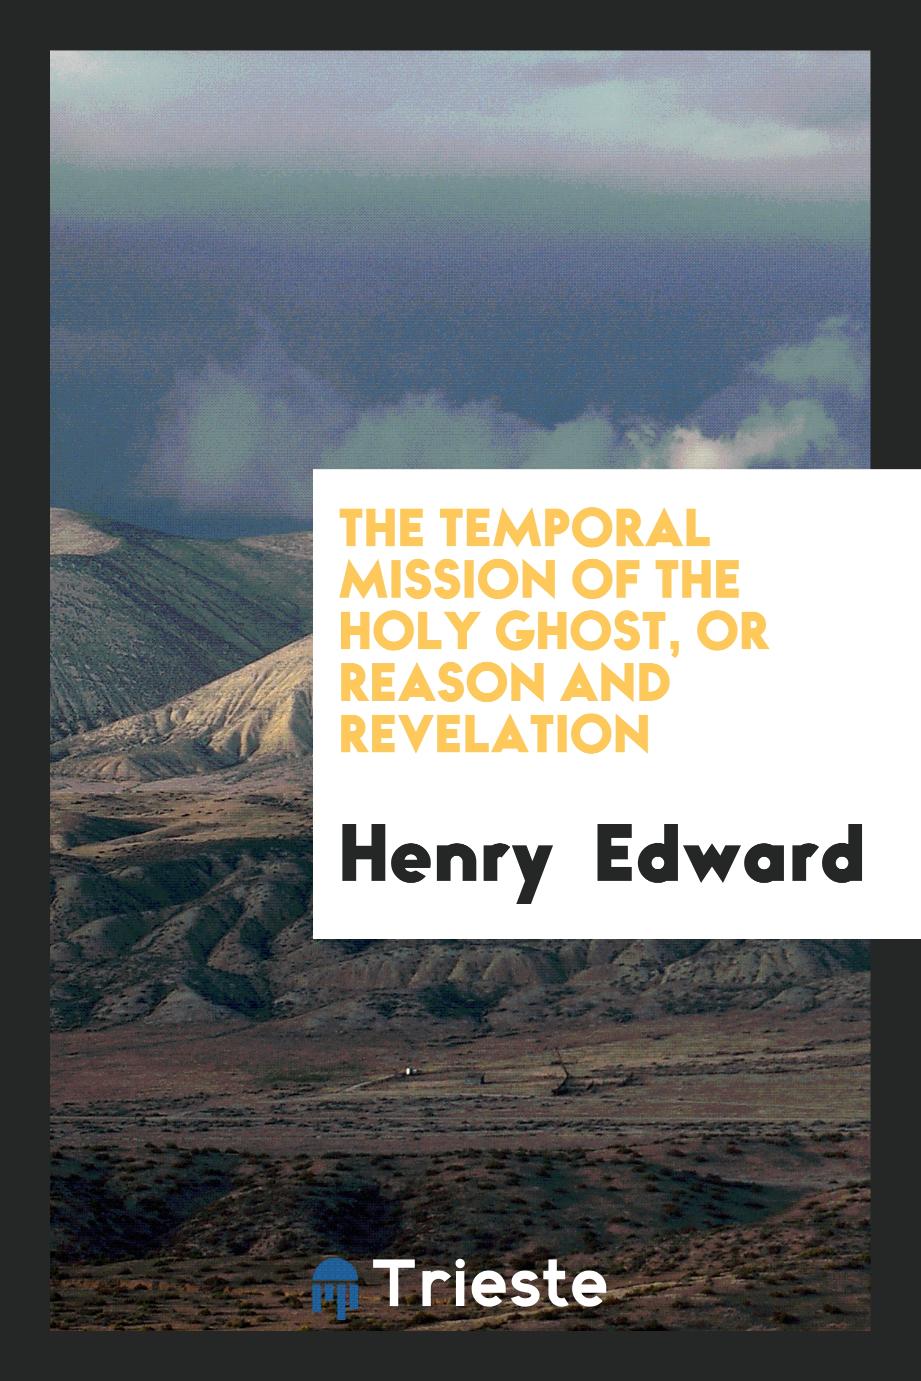 The Temporal Mission of the Holy Ghost, or Reason and Revelation